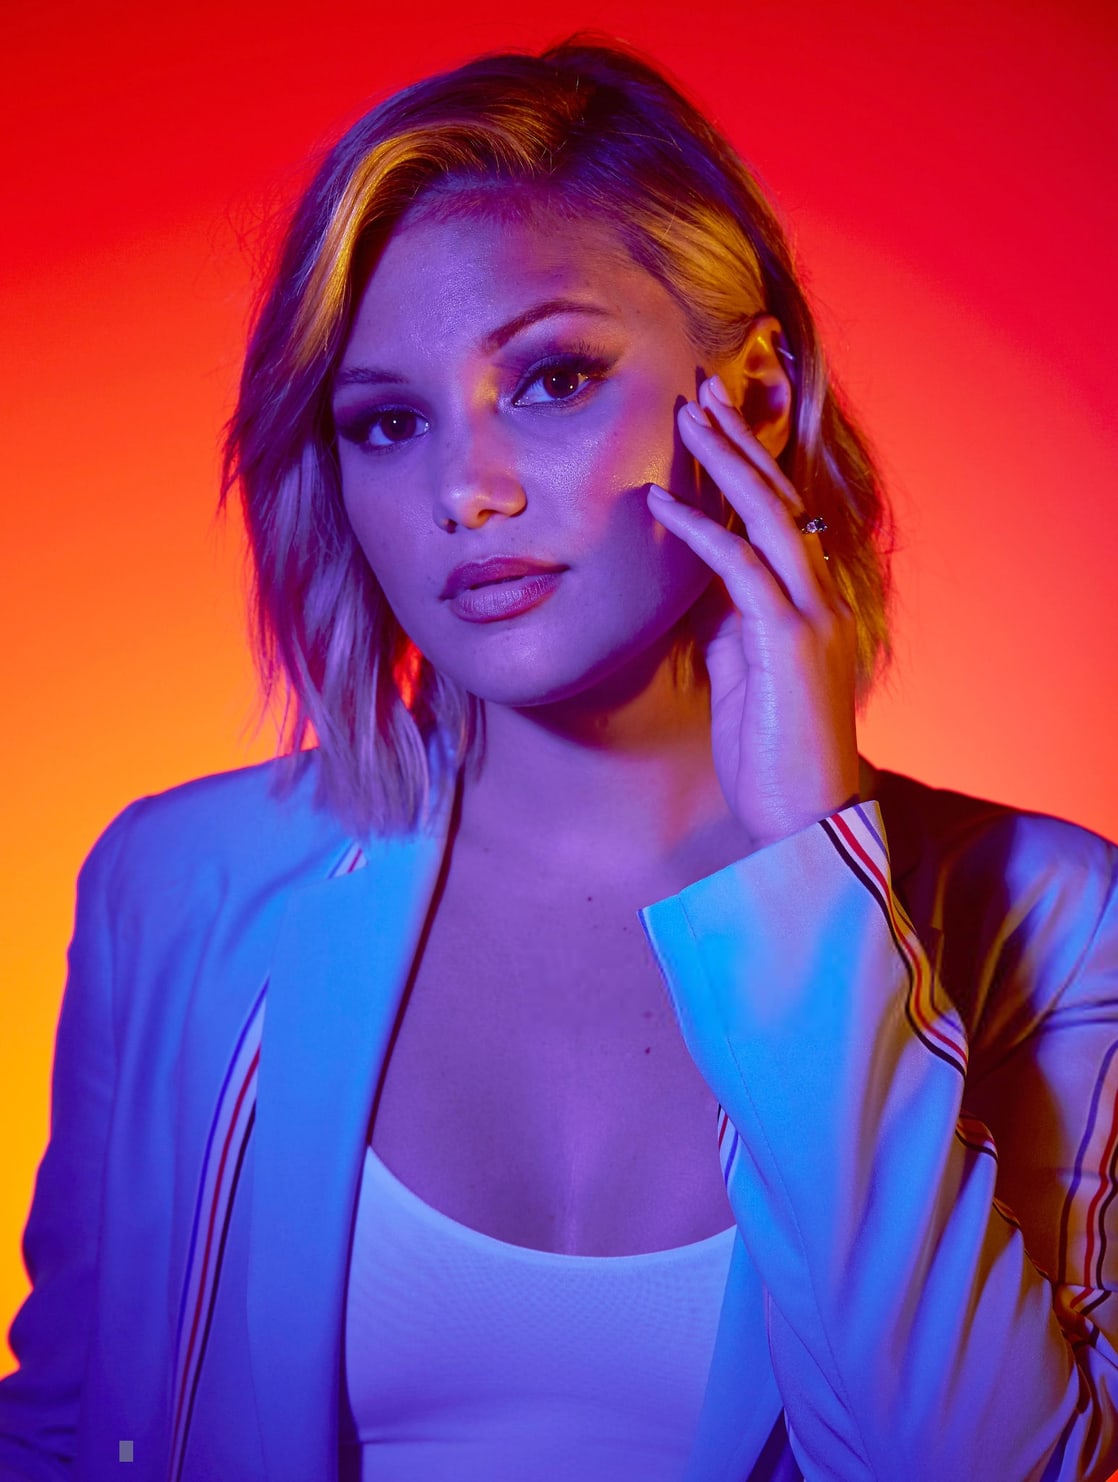 Picture of Olivia Holt